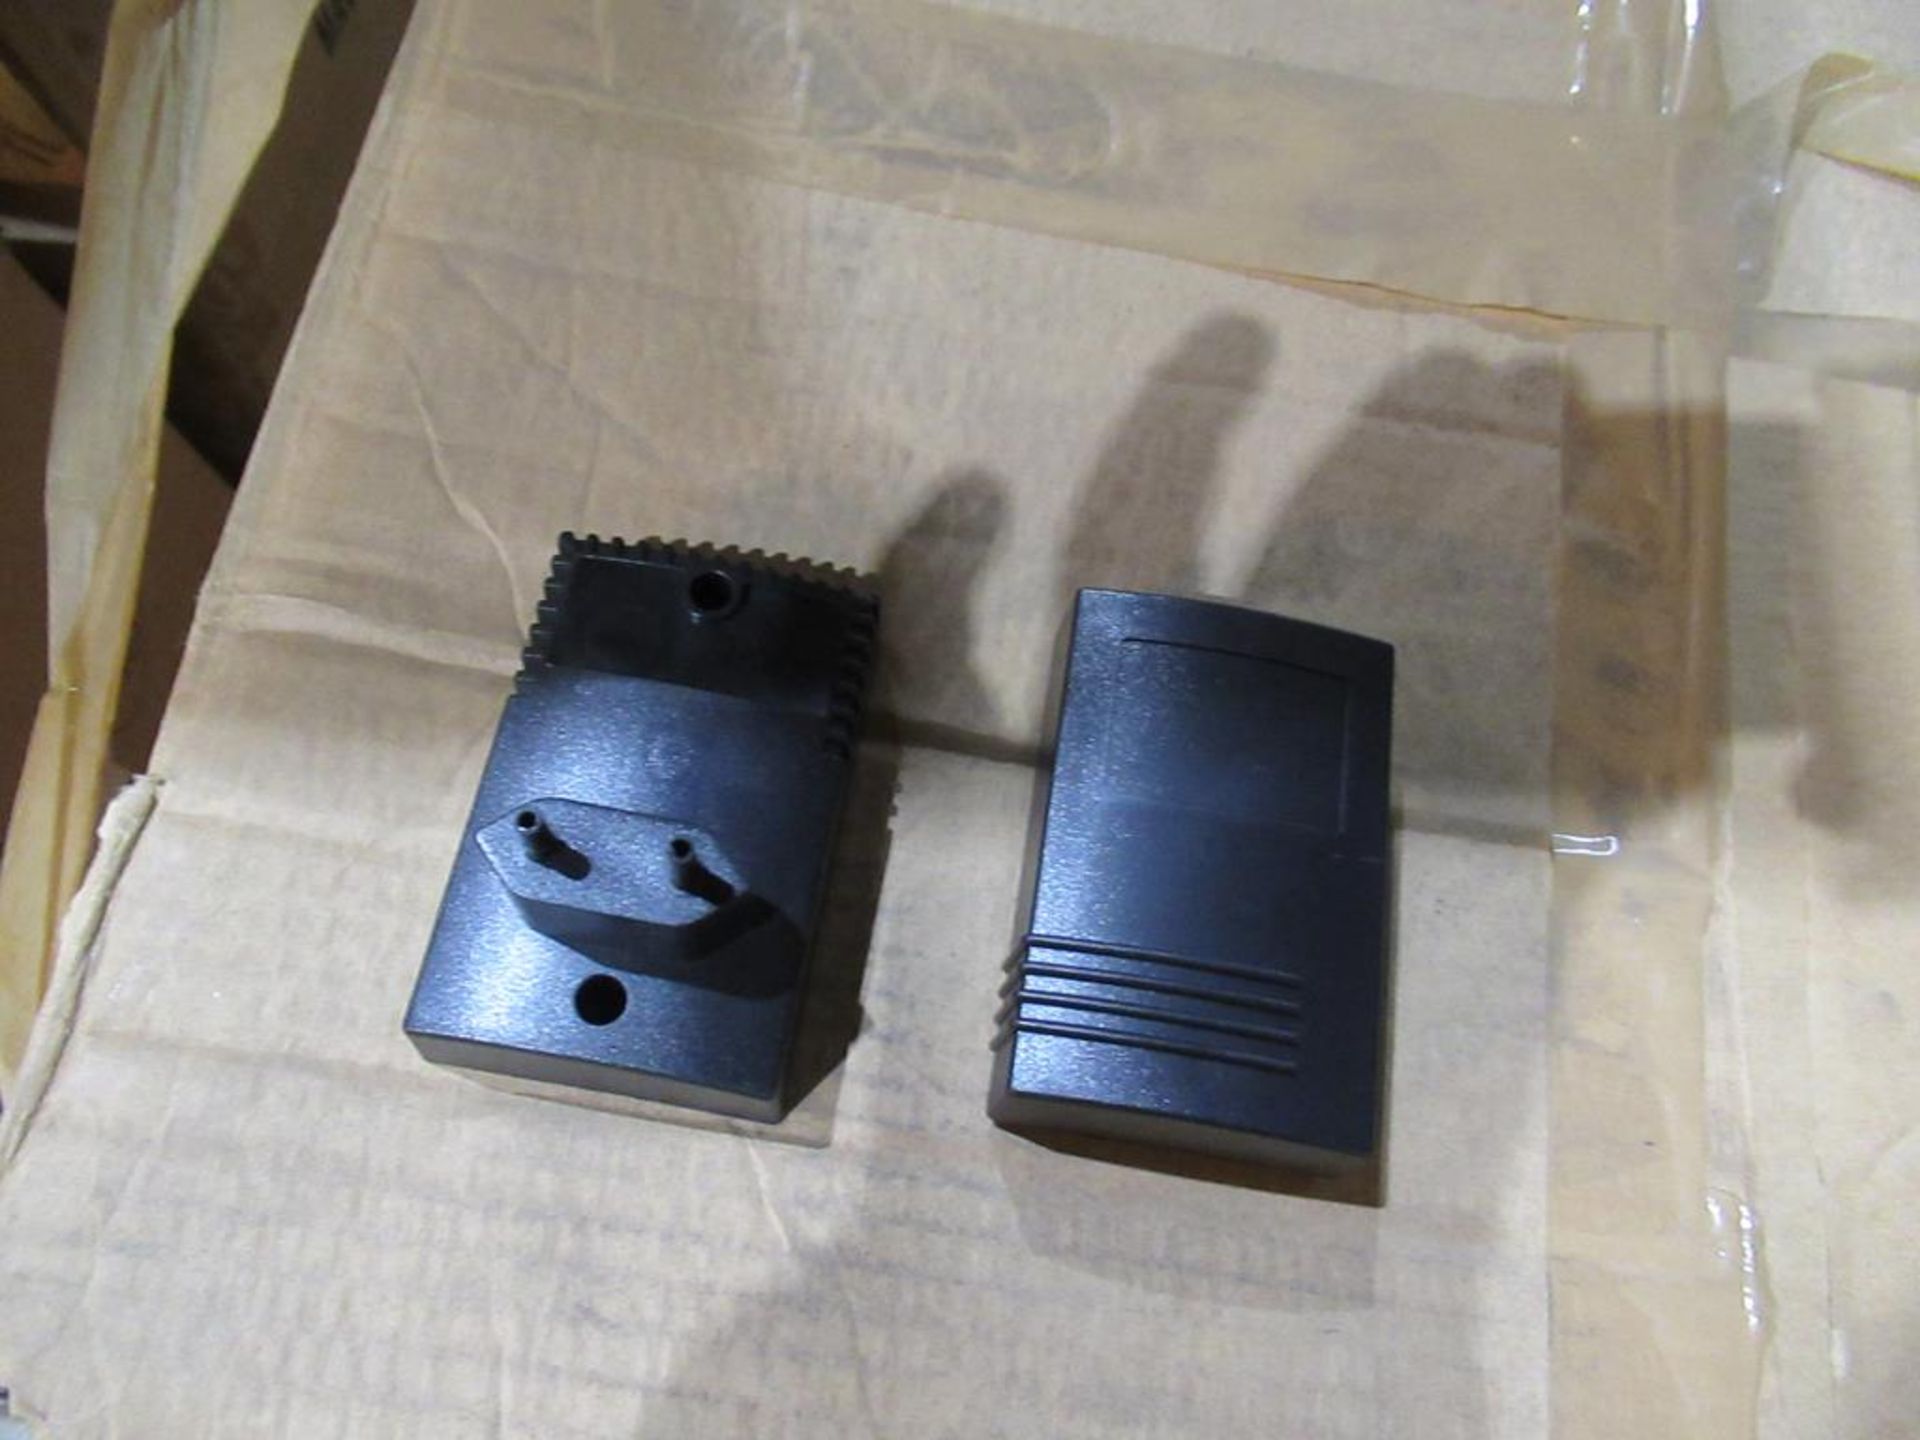 150x Euro Mains Adaptor Cases Size 38 - Image 2 of 3